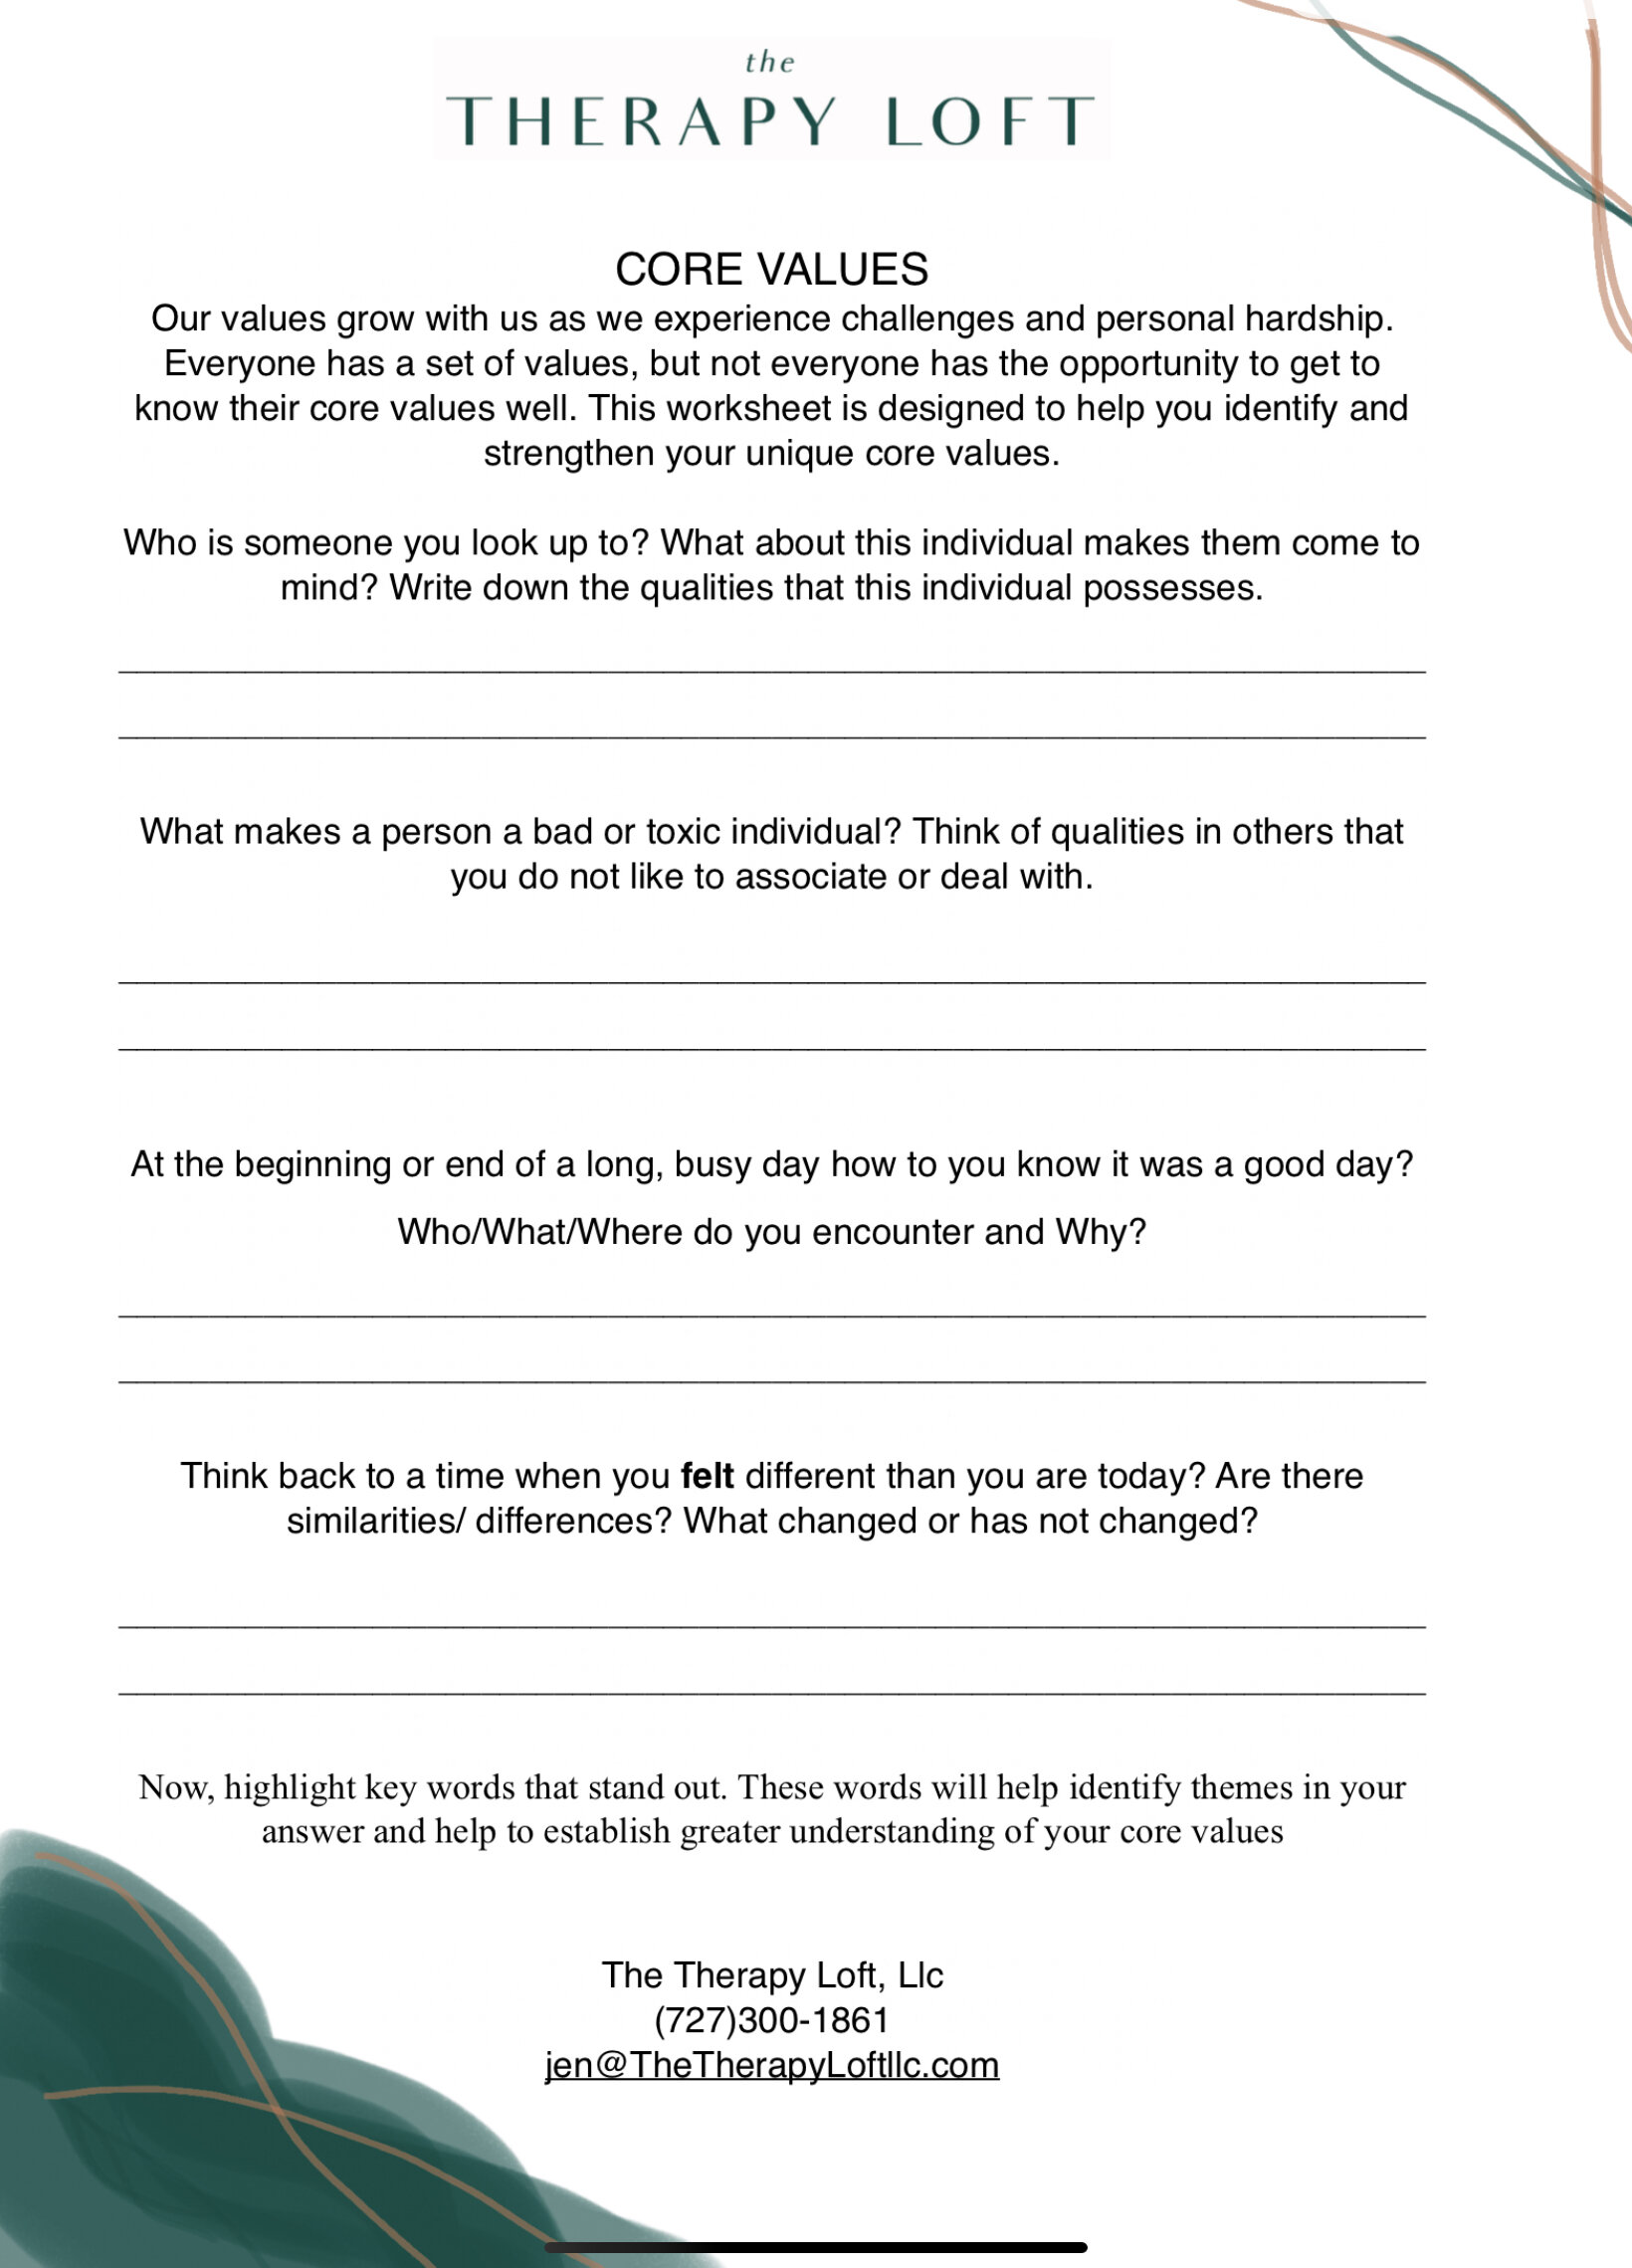 free-core-values-worksheet-the-therapy-loft-llc